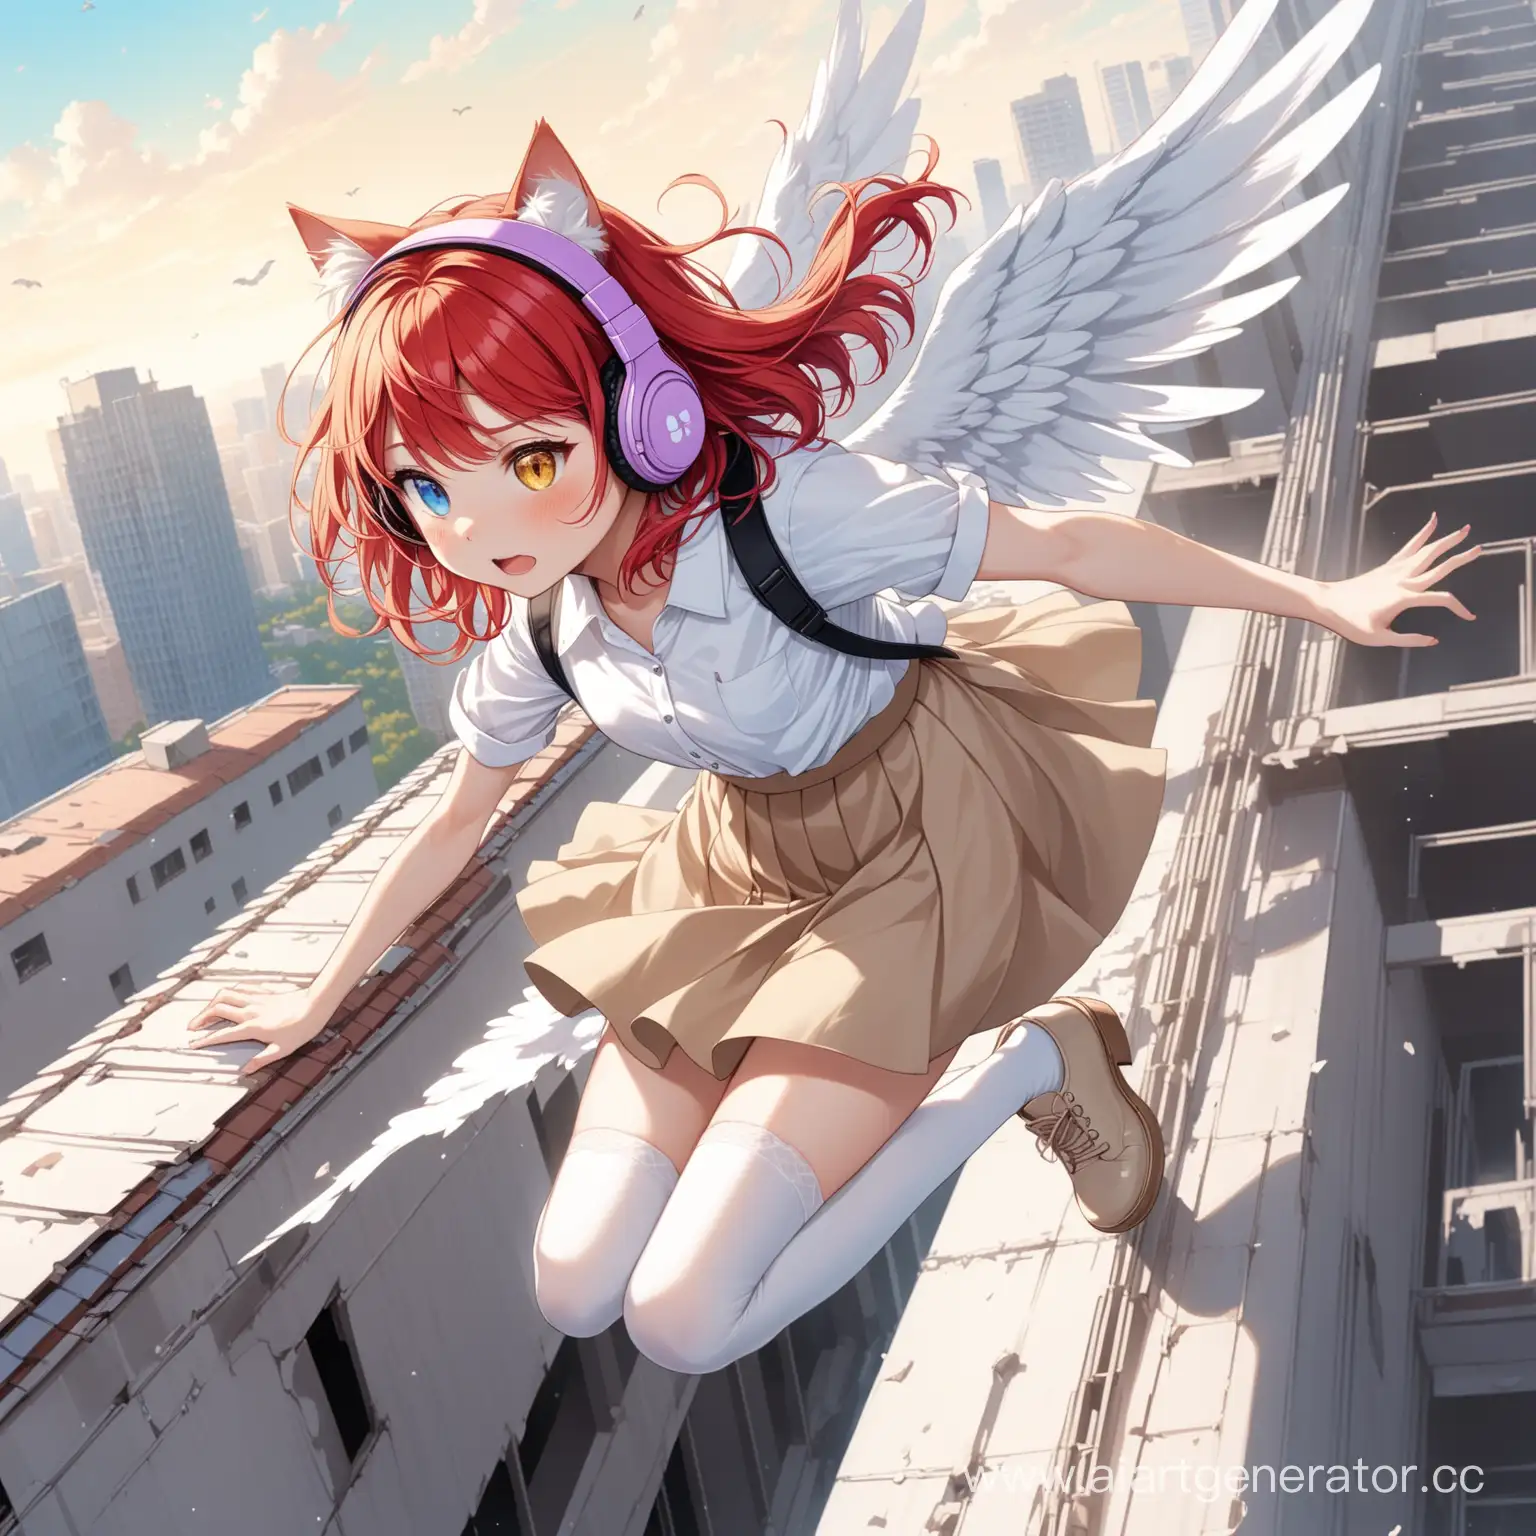 RedHaired-Girl-Cat-with-Heterochromia-and-Angelic-Wings-Falls-from-Building